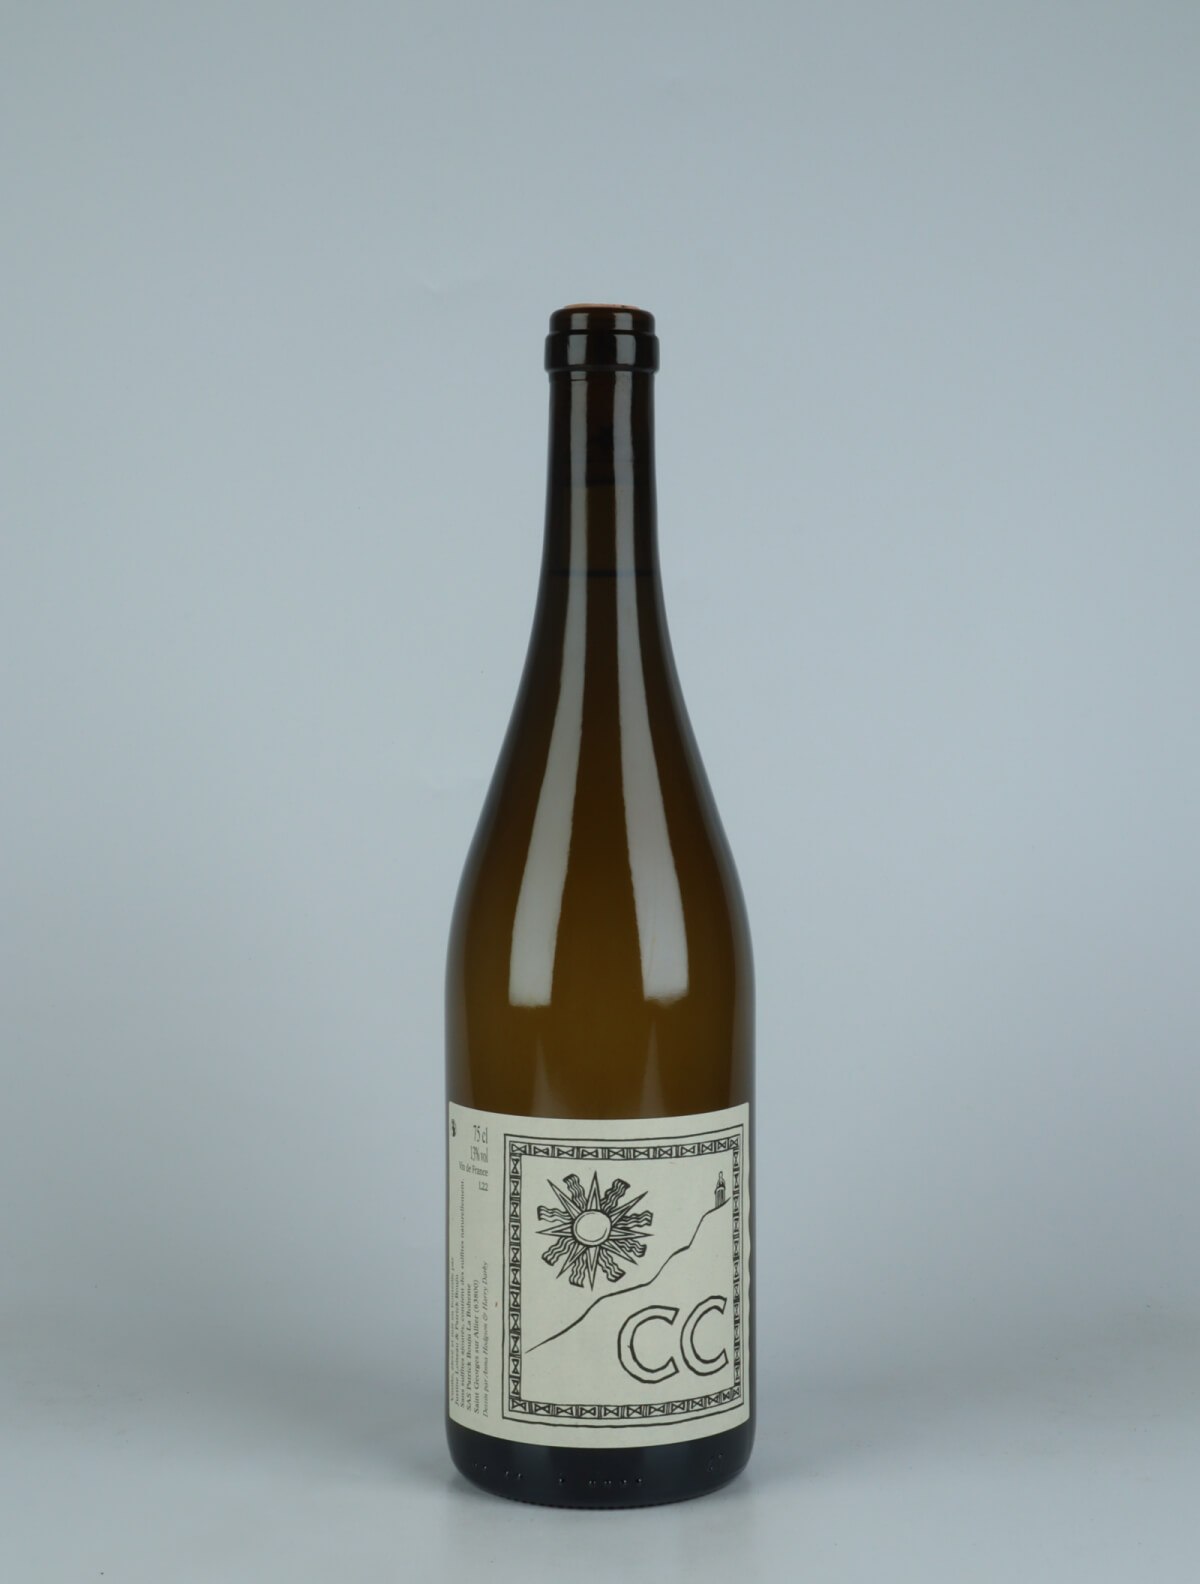 A bottle 2022 CC White wine from Patrick Bouju, Auvergne in France